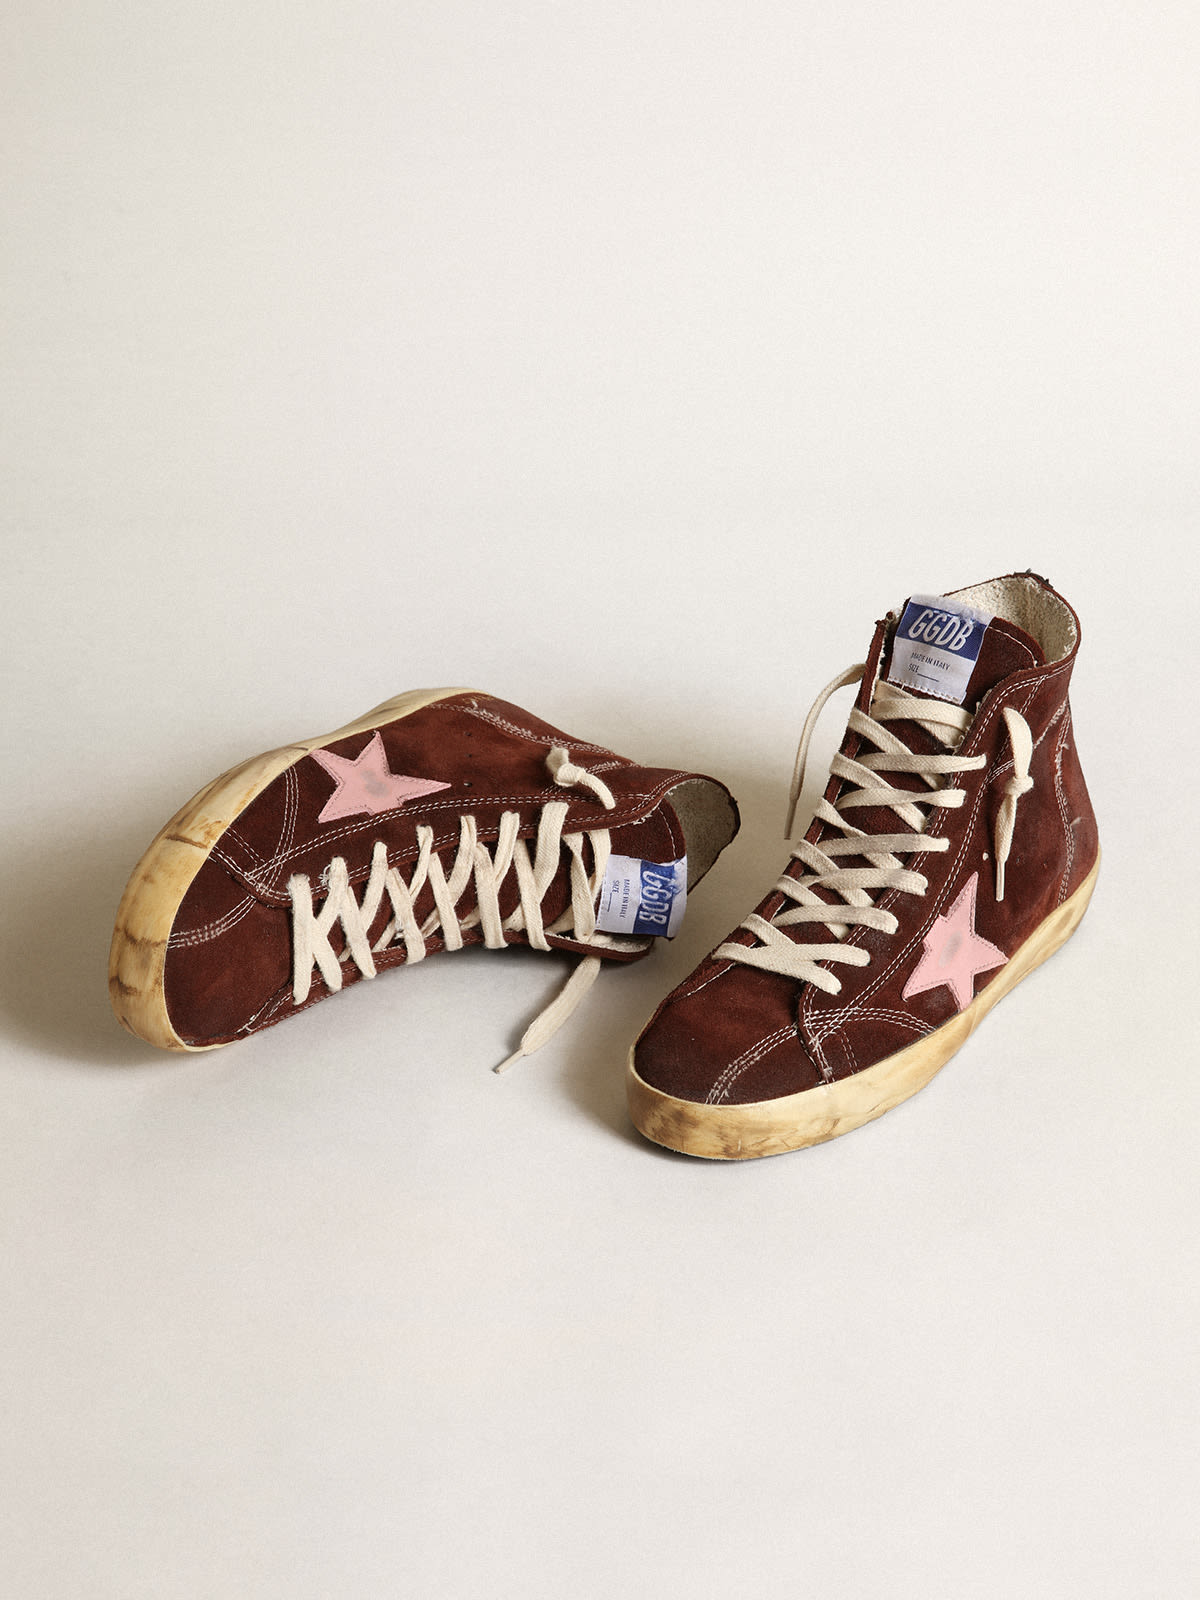 Golden Goose - Francy sneakers in brown suede with pink leather star and black nappa leather heel tab in 